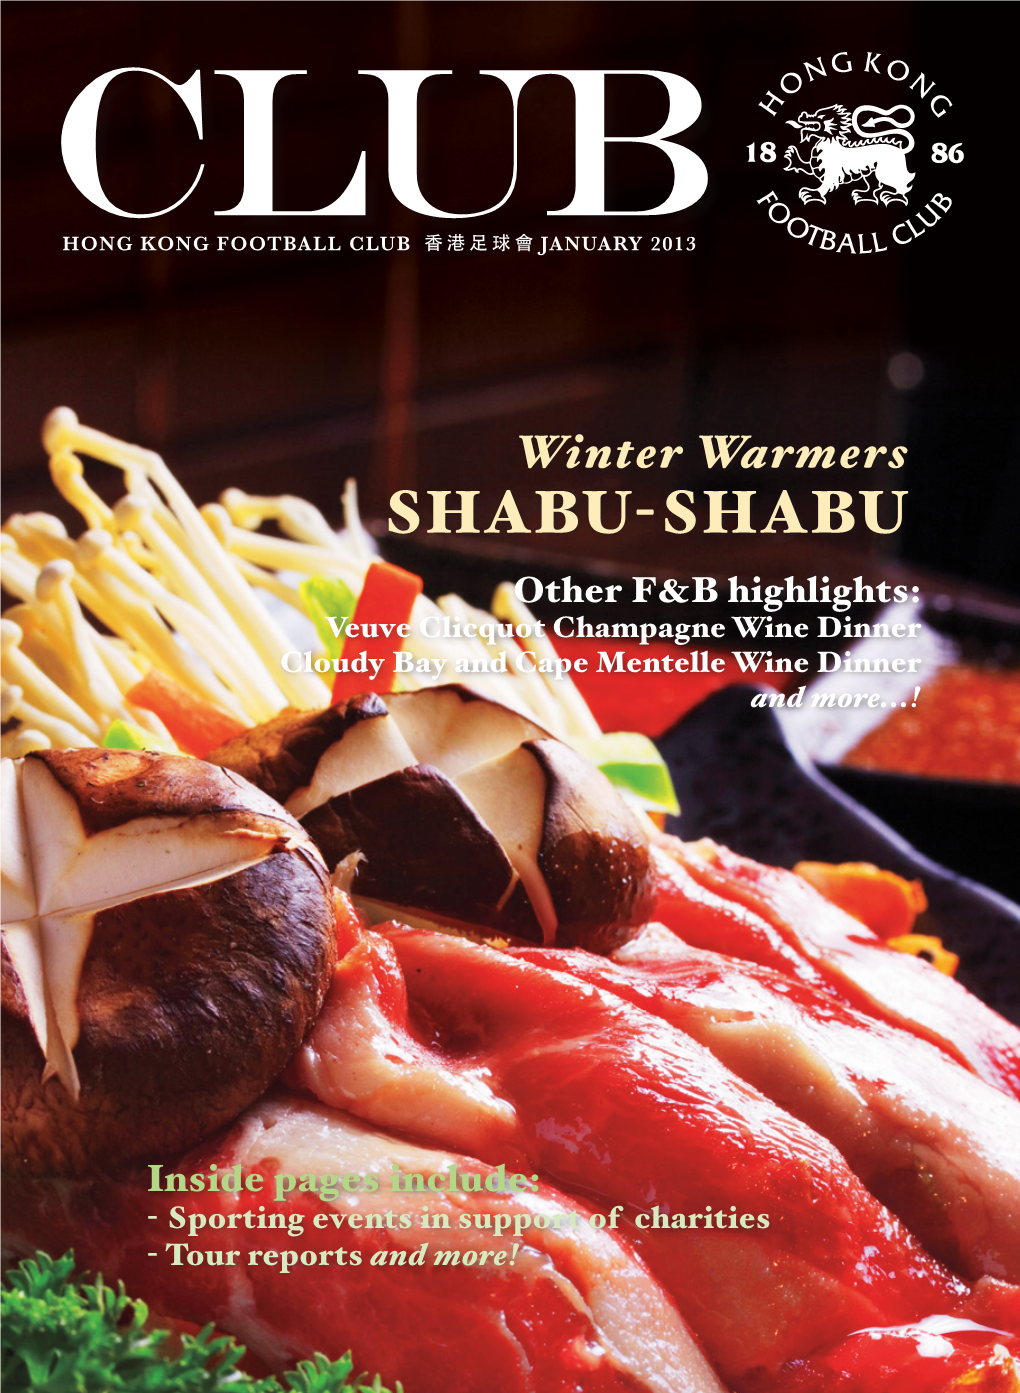 SHABU-SHABU Other F&B Highlights: Veuve Clicquot Champagne Wine Dinner Cloudy Bay and Cape Mentelle Wine Dinner and More...!